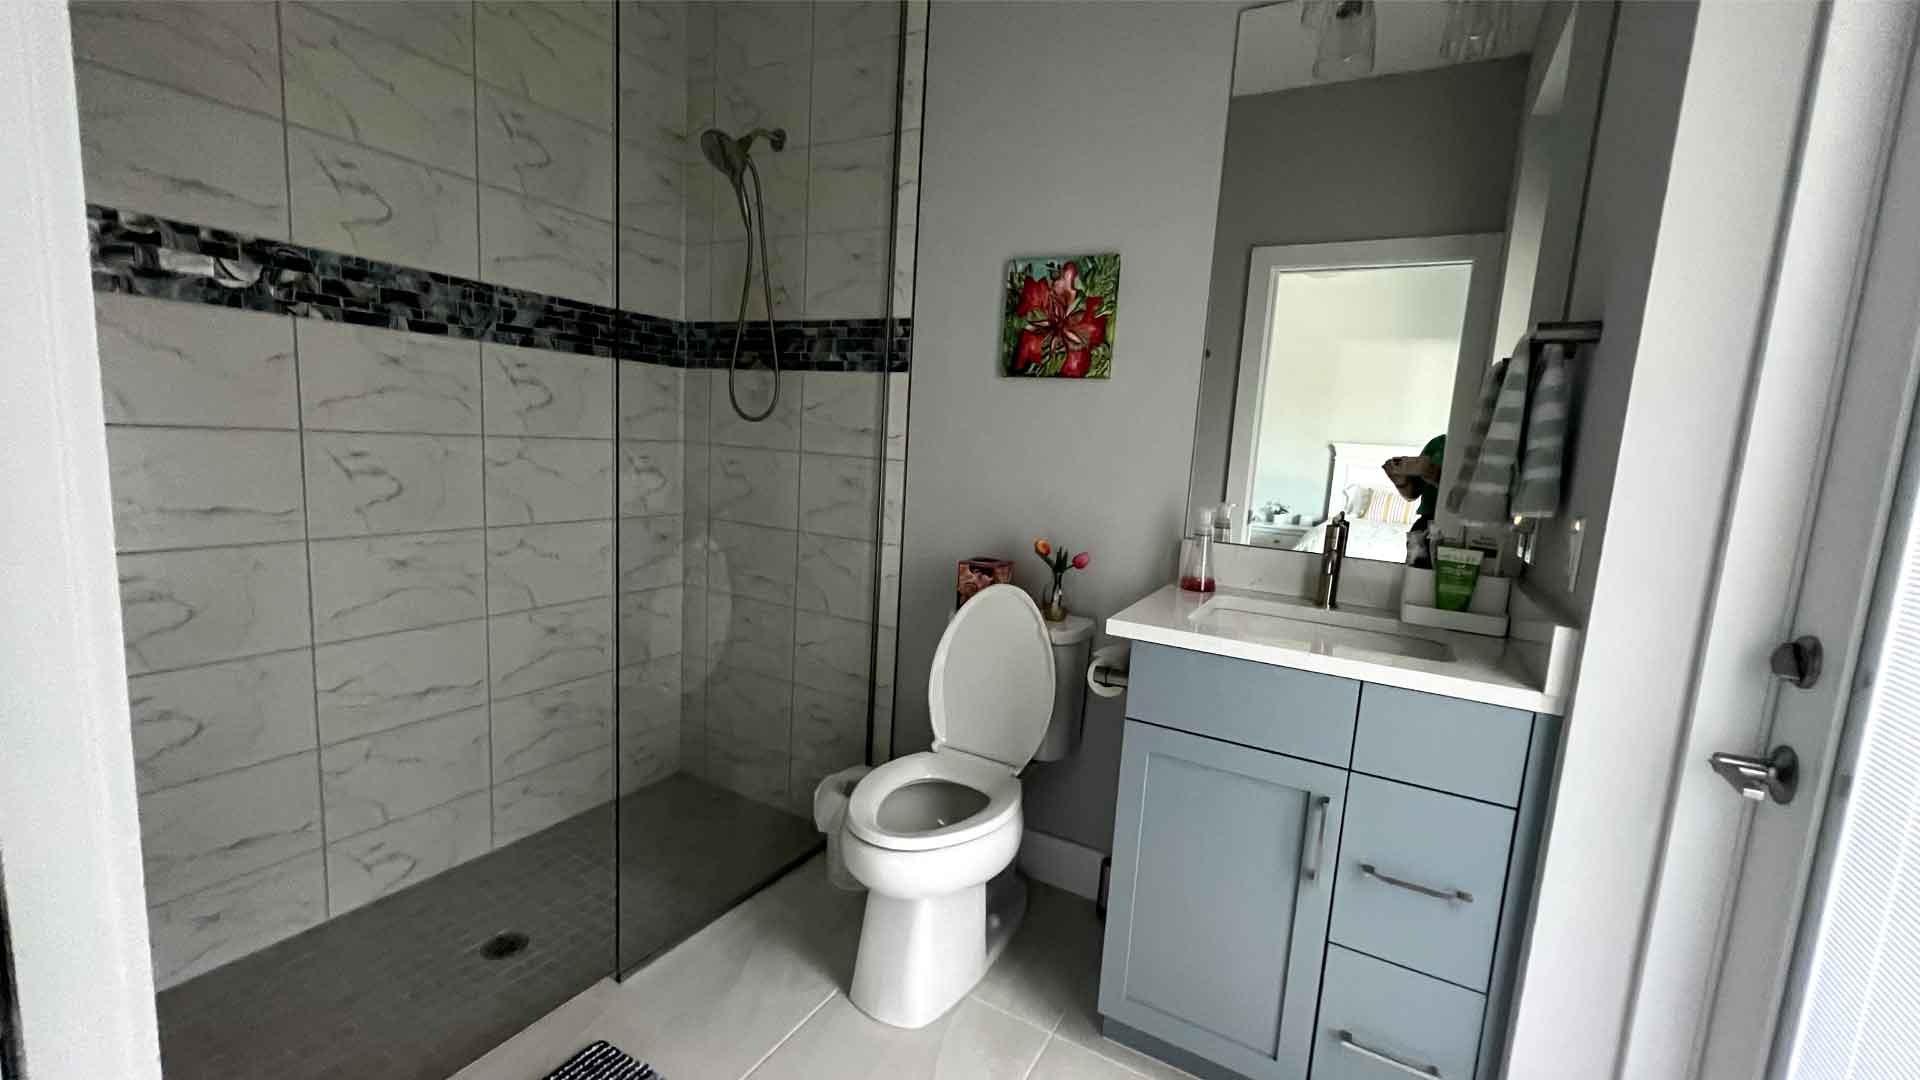 Bathroom - Deep cleaning in Cape Coral by Goldmillio - Apr 5